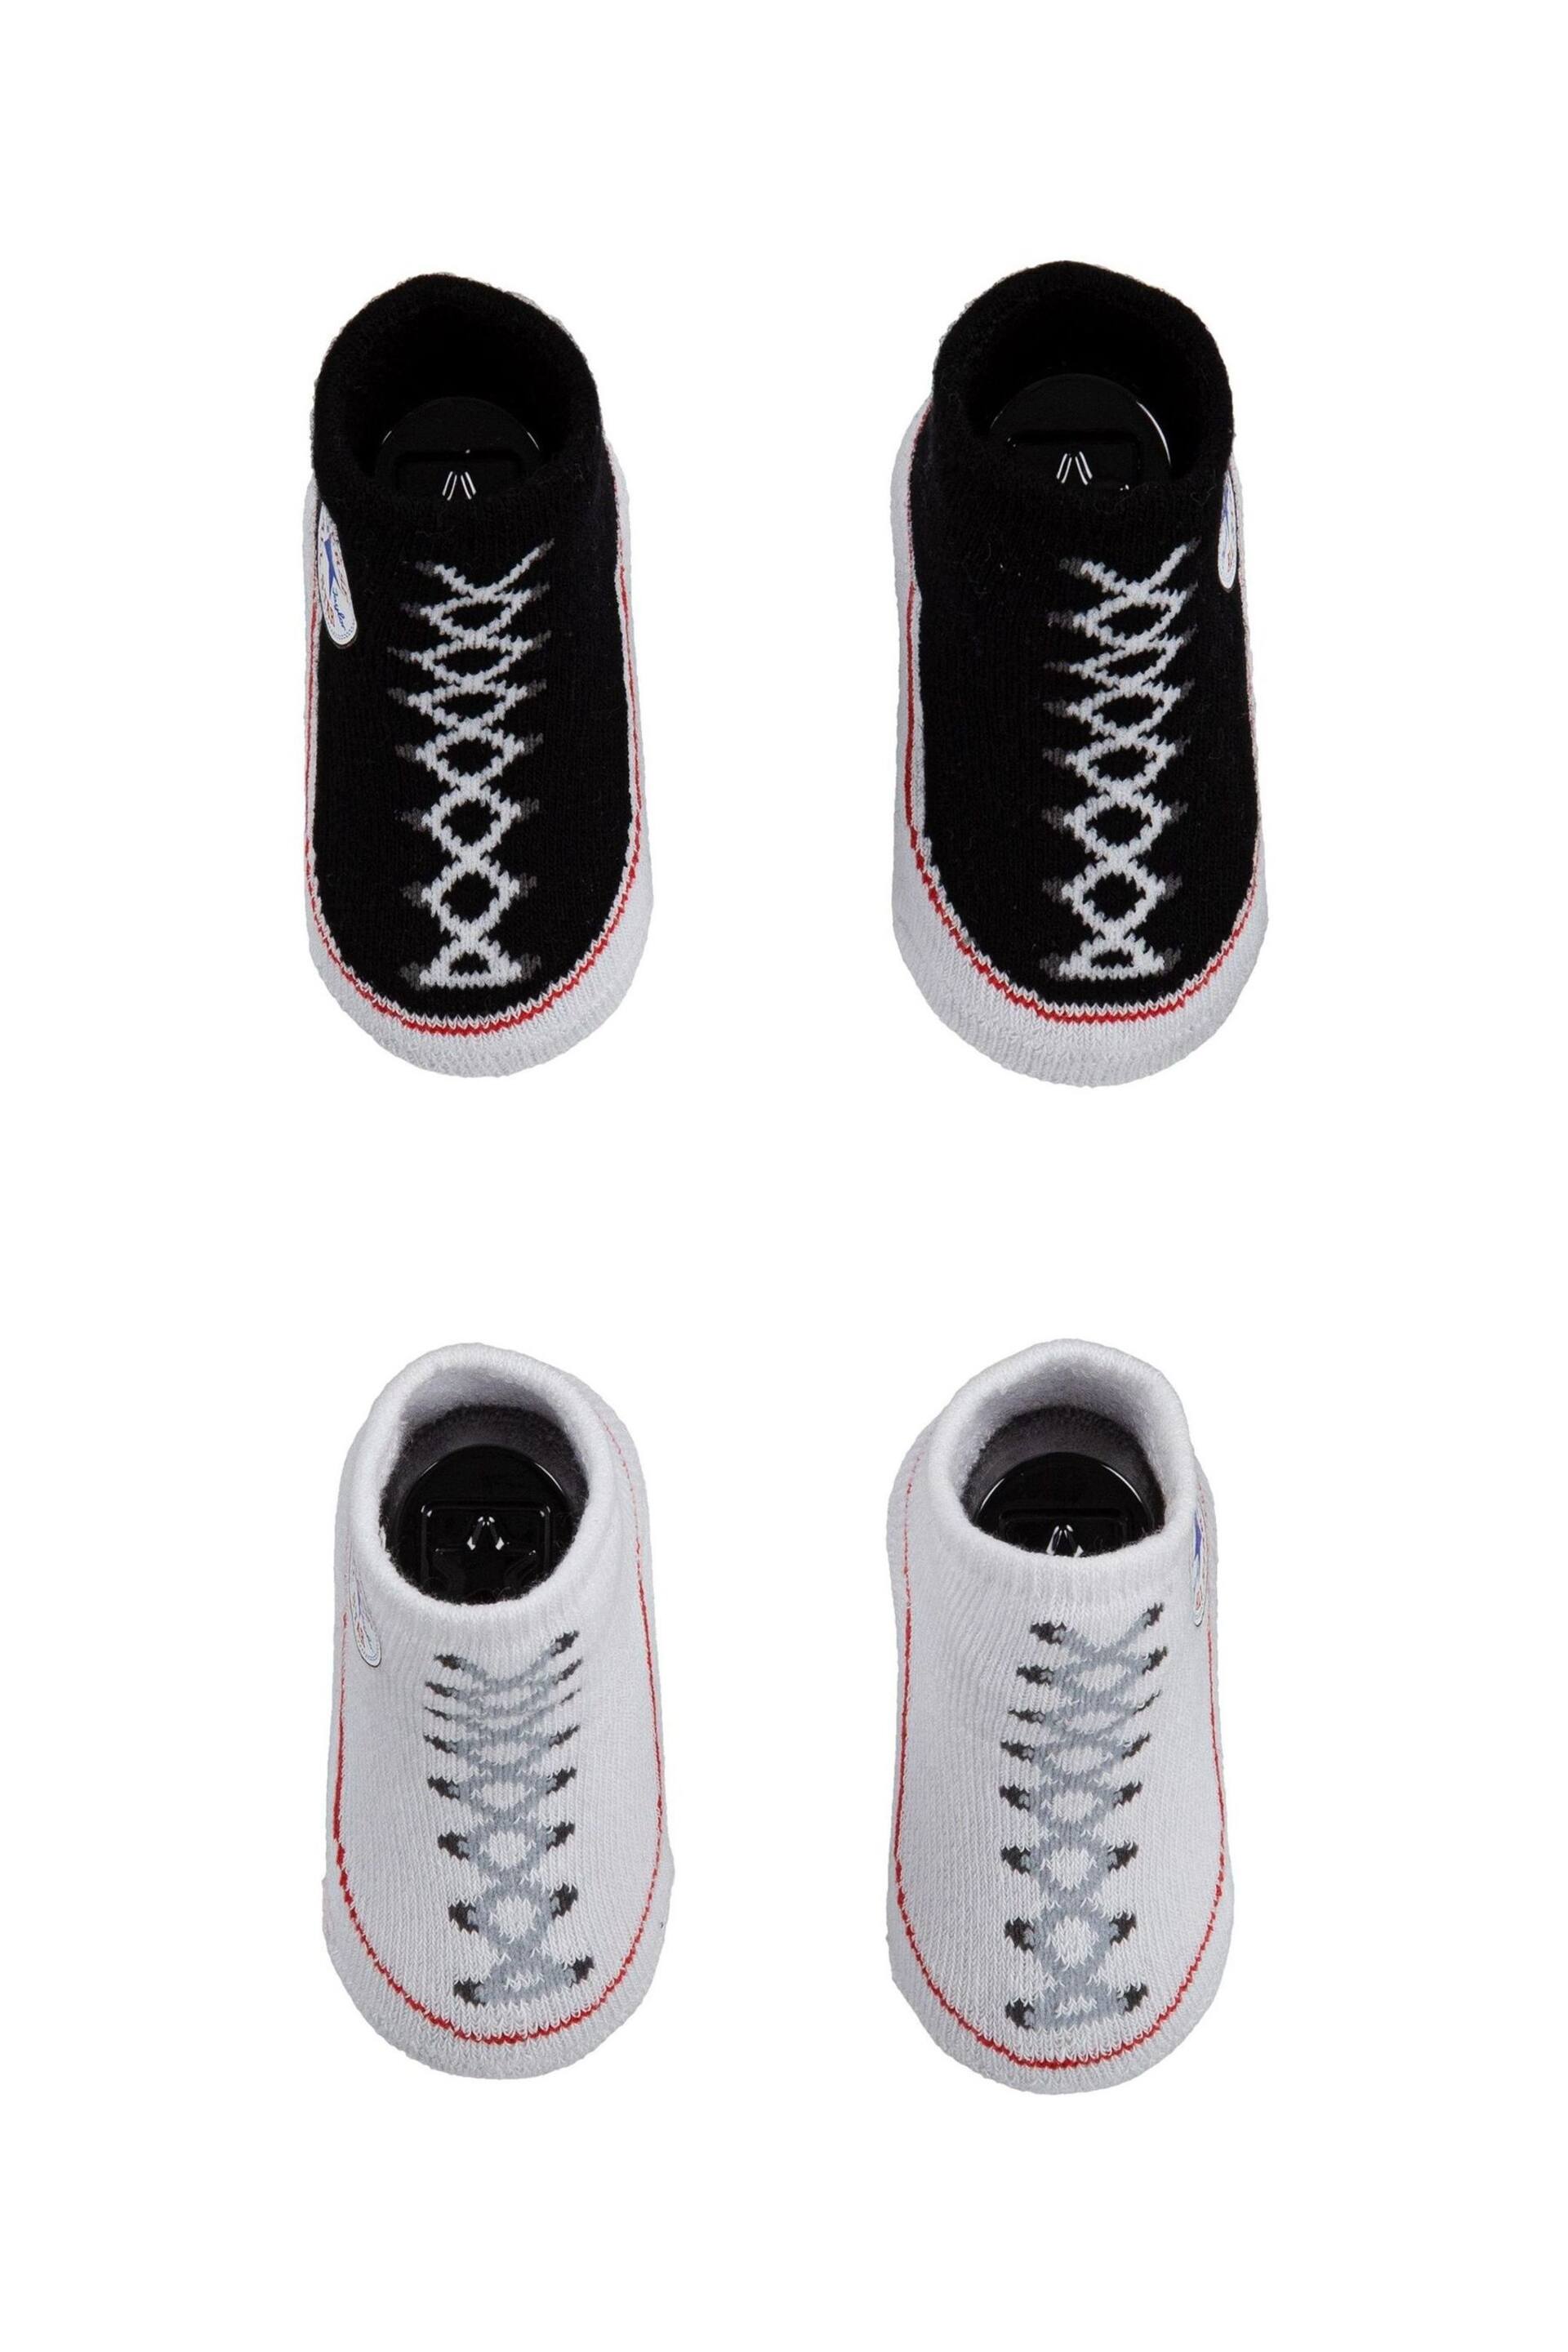 Converse Black Chuck Booties 2 Pack - Image 1 of 3